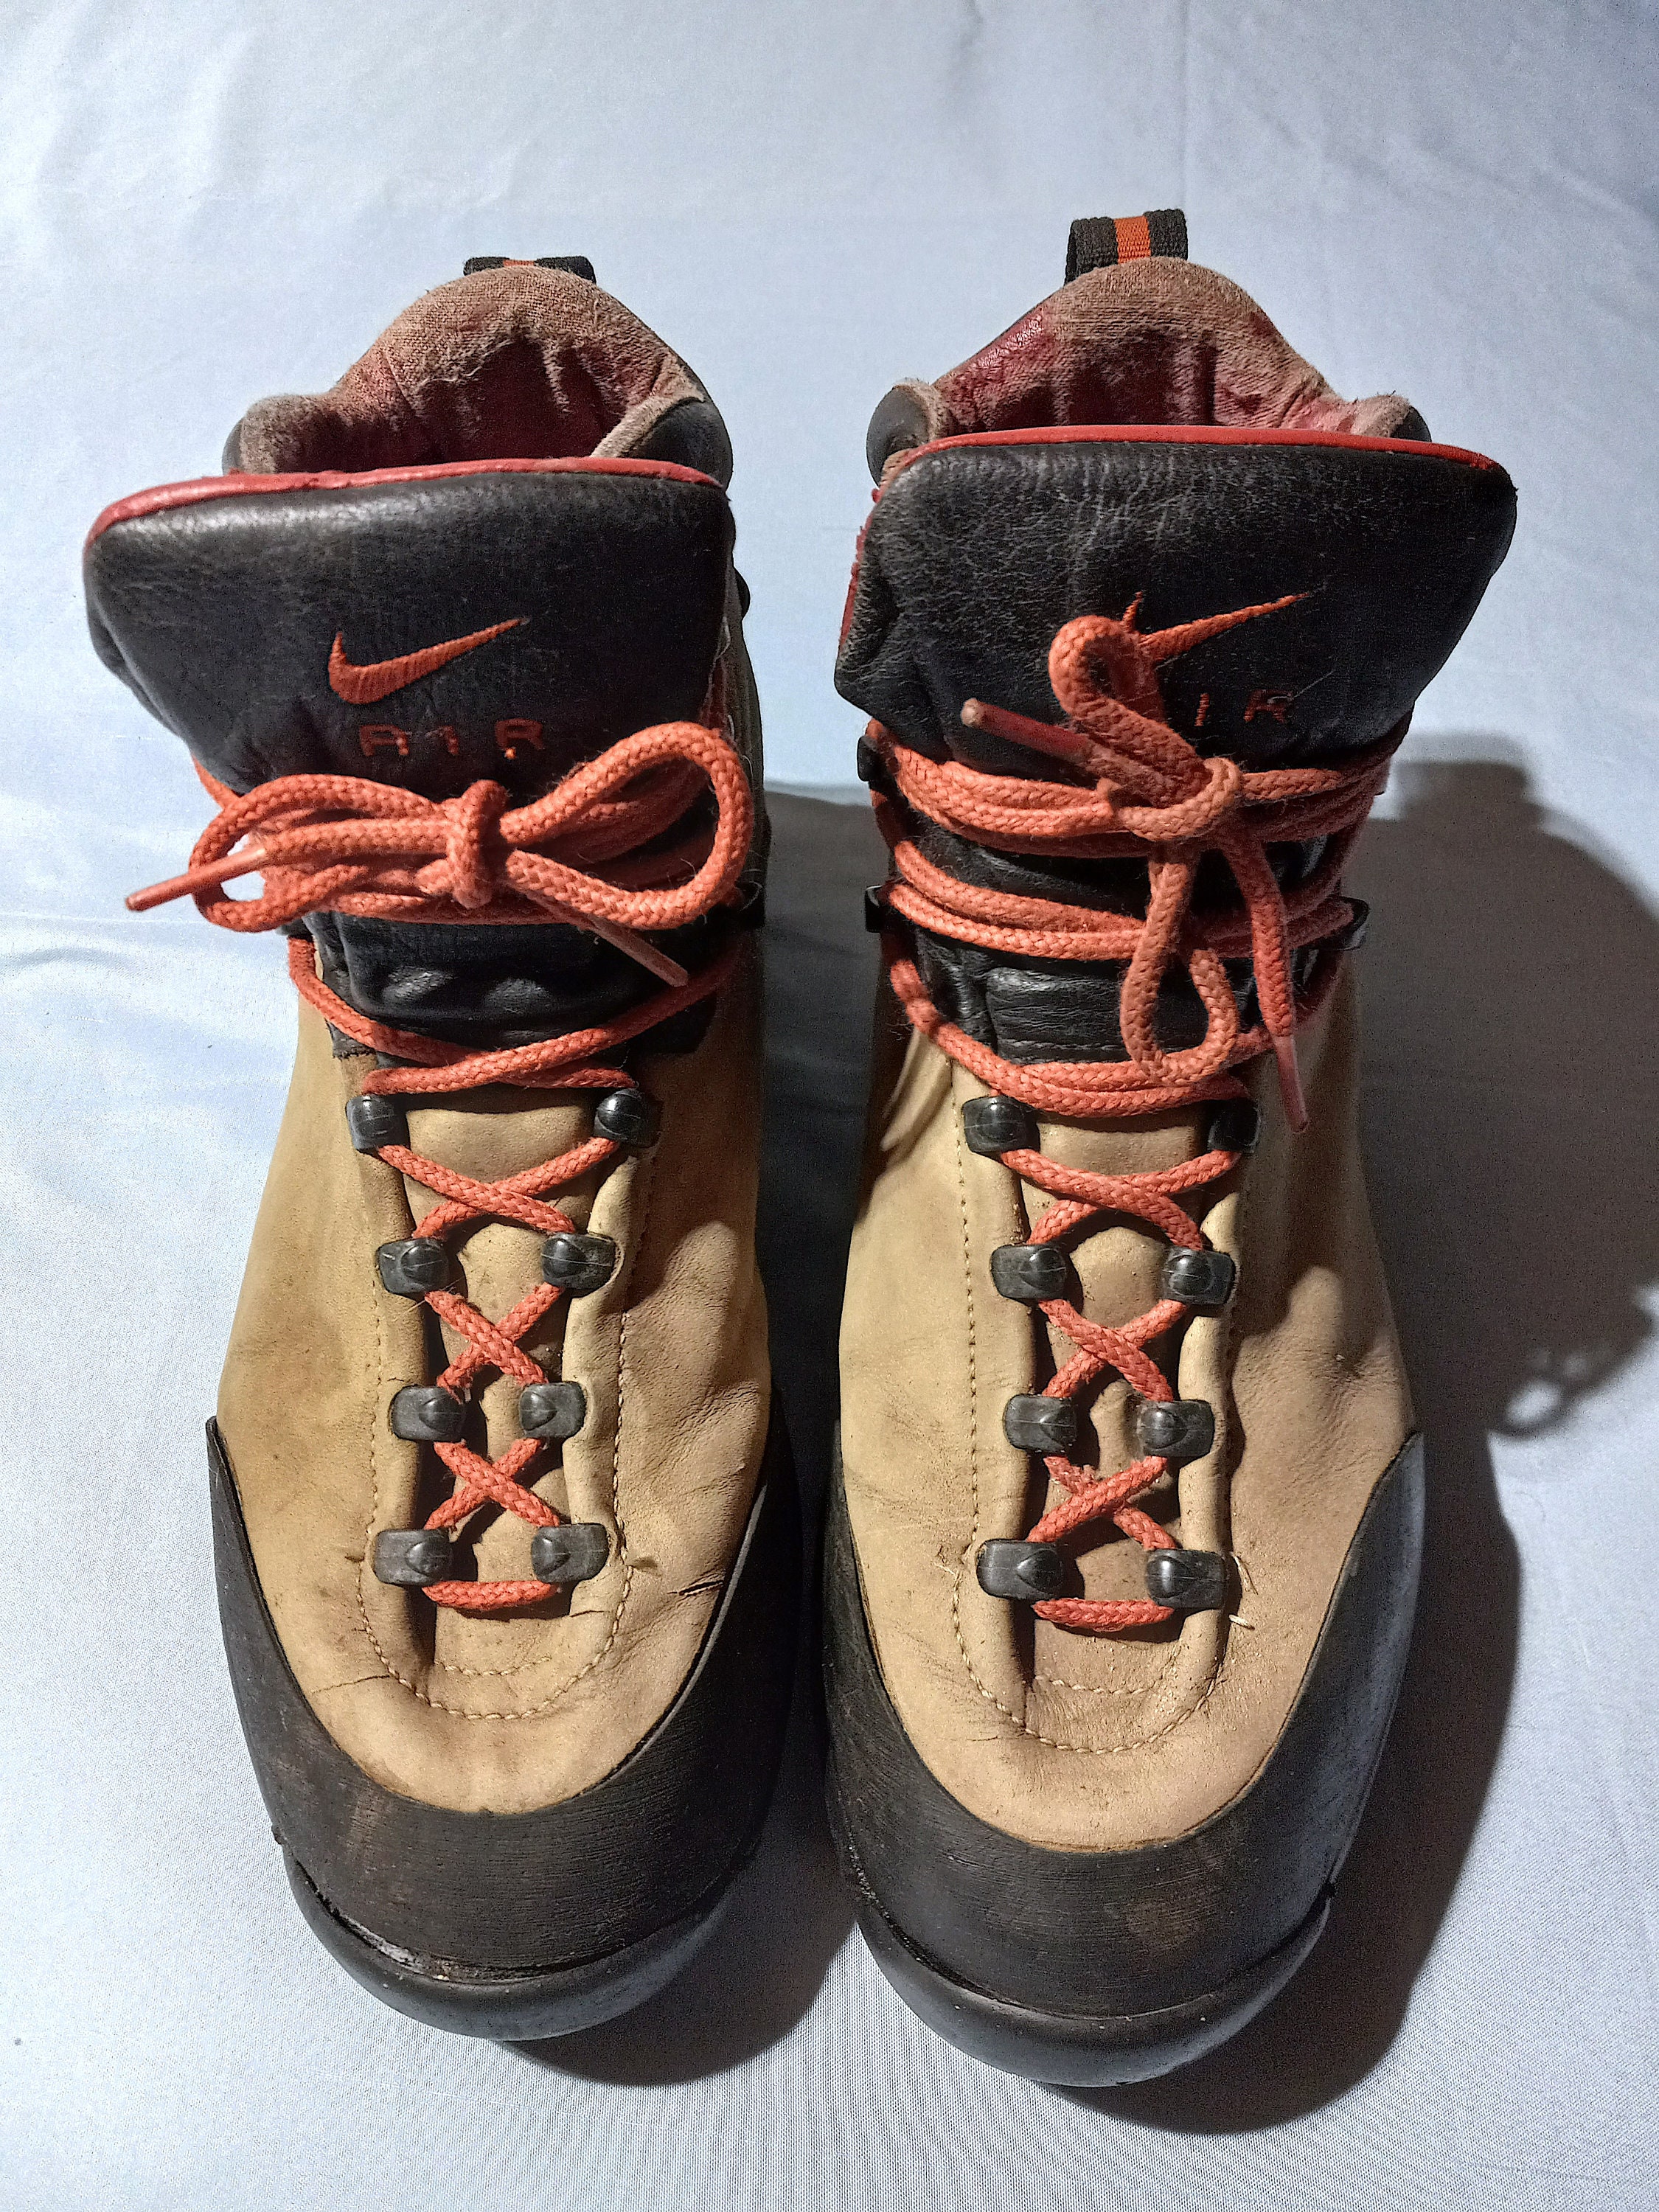 Vintage 1990s 90s Nike Air ACG Leather Gorpcore Hiking - Etsy